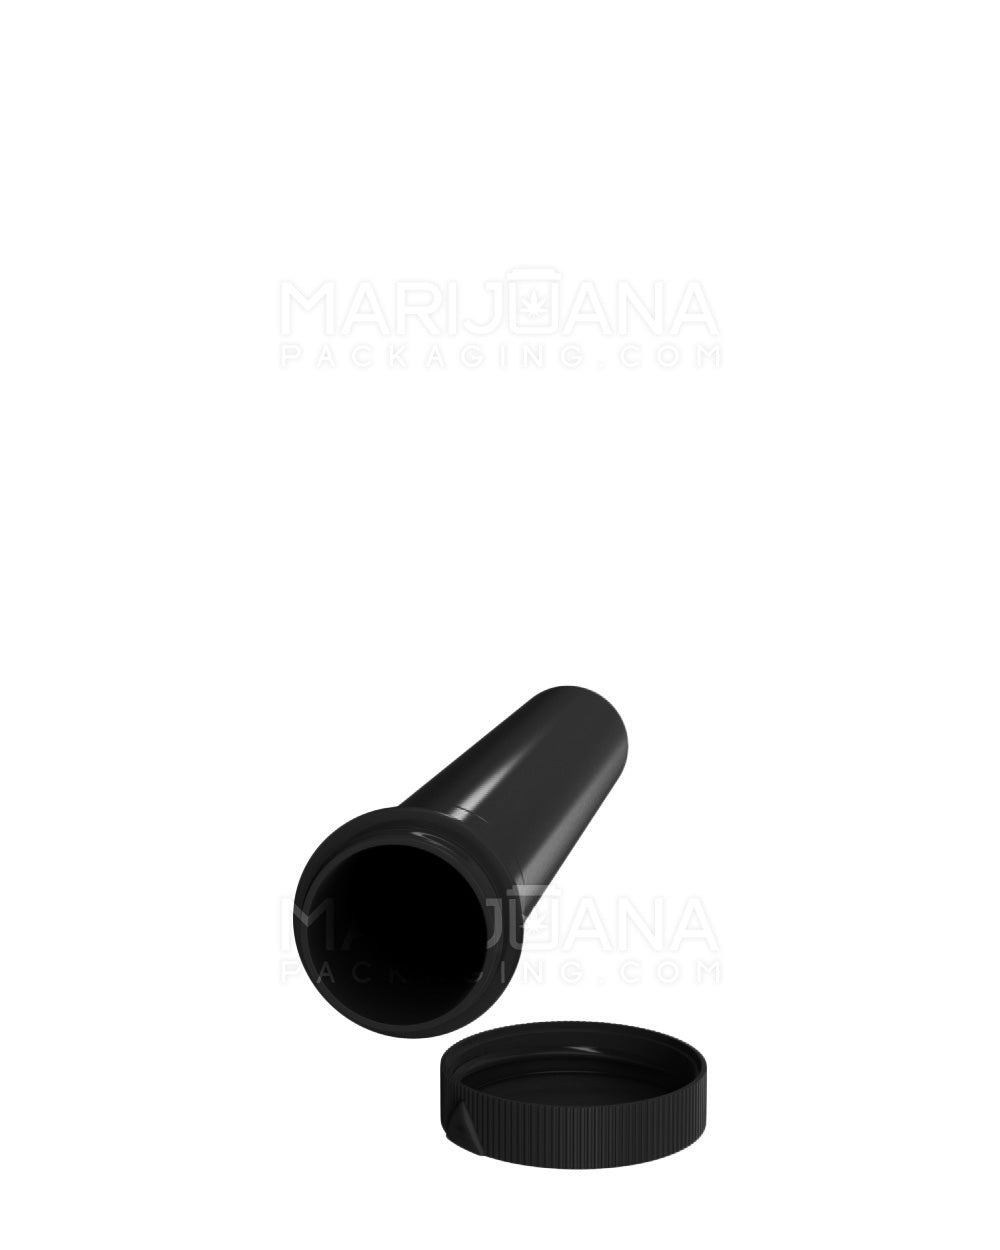 Child Resistant | King Size ‘Line-Up Arrow’ Pre-Roll Tubes | 116mm - Opaque Black Plastic - 500 Count - 5